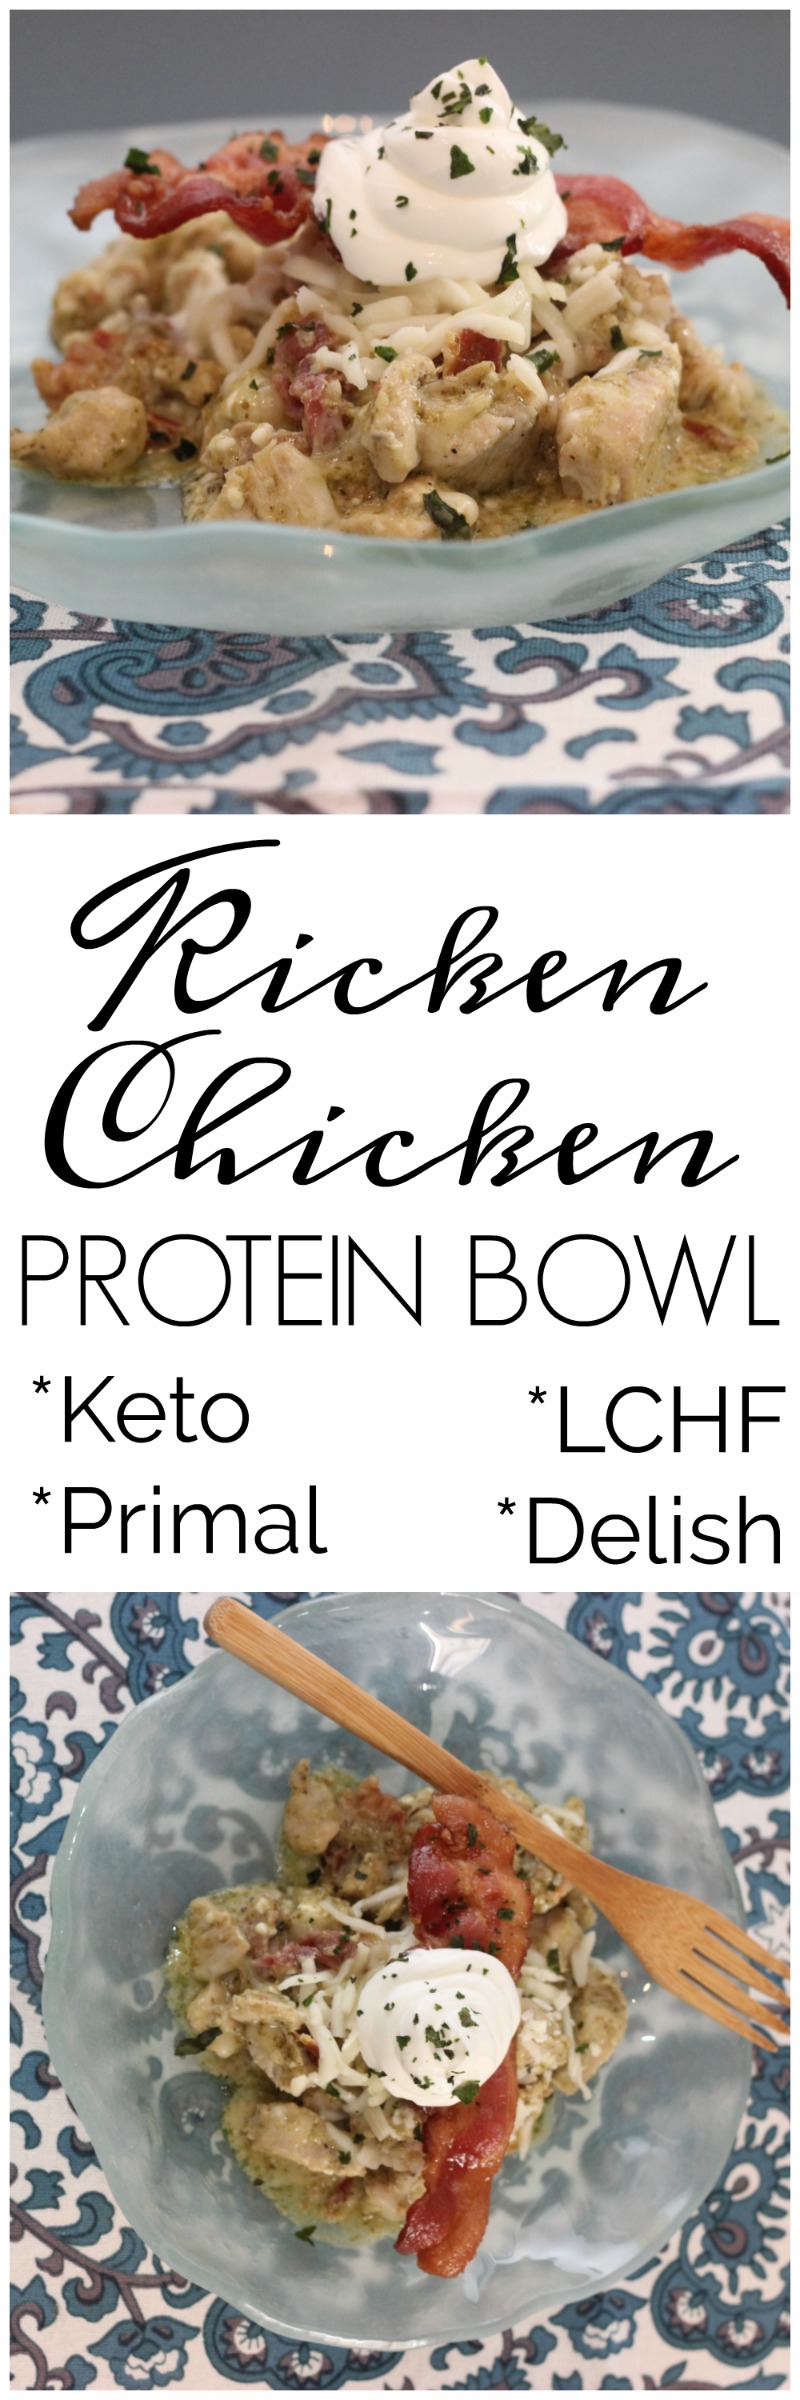 chicken protein bowl for keto or low carb